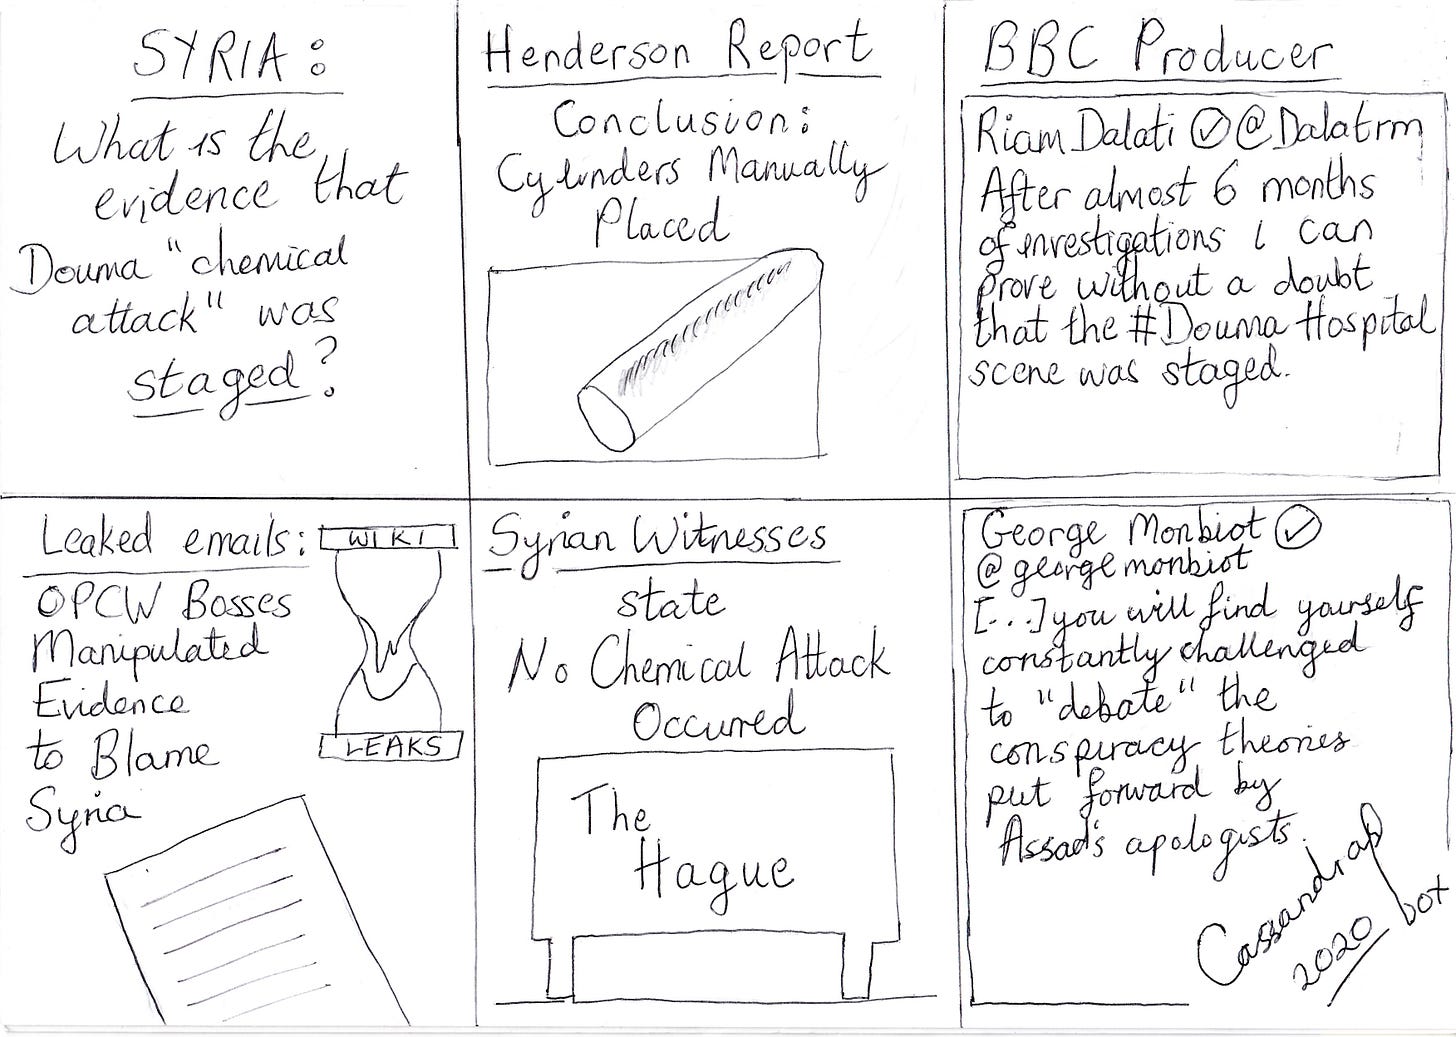 Cartoon reading: SYRIA, what is the evidence that the Douma "chemical attack" was staged? next panel: Henderson report: Cylinders manually placed, Next panel: BBC producer, text of tweet from Riam Dalati @dalatrm reading 'After almost 6 months of investigations i can prove without a doubt that the #Douma hospital scene was staged, next panel: Leaked emails Wikileaks OPCW Bosses Manipulated evidence to blame Syria, next panel Syrian witnesses the Hague state no chemical attack occurred. Last panel tweet from George Monbiot blaming Syrian government.